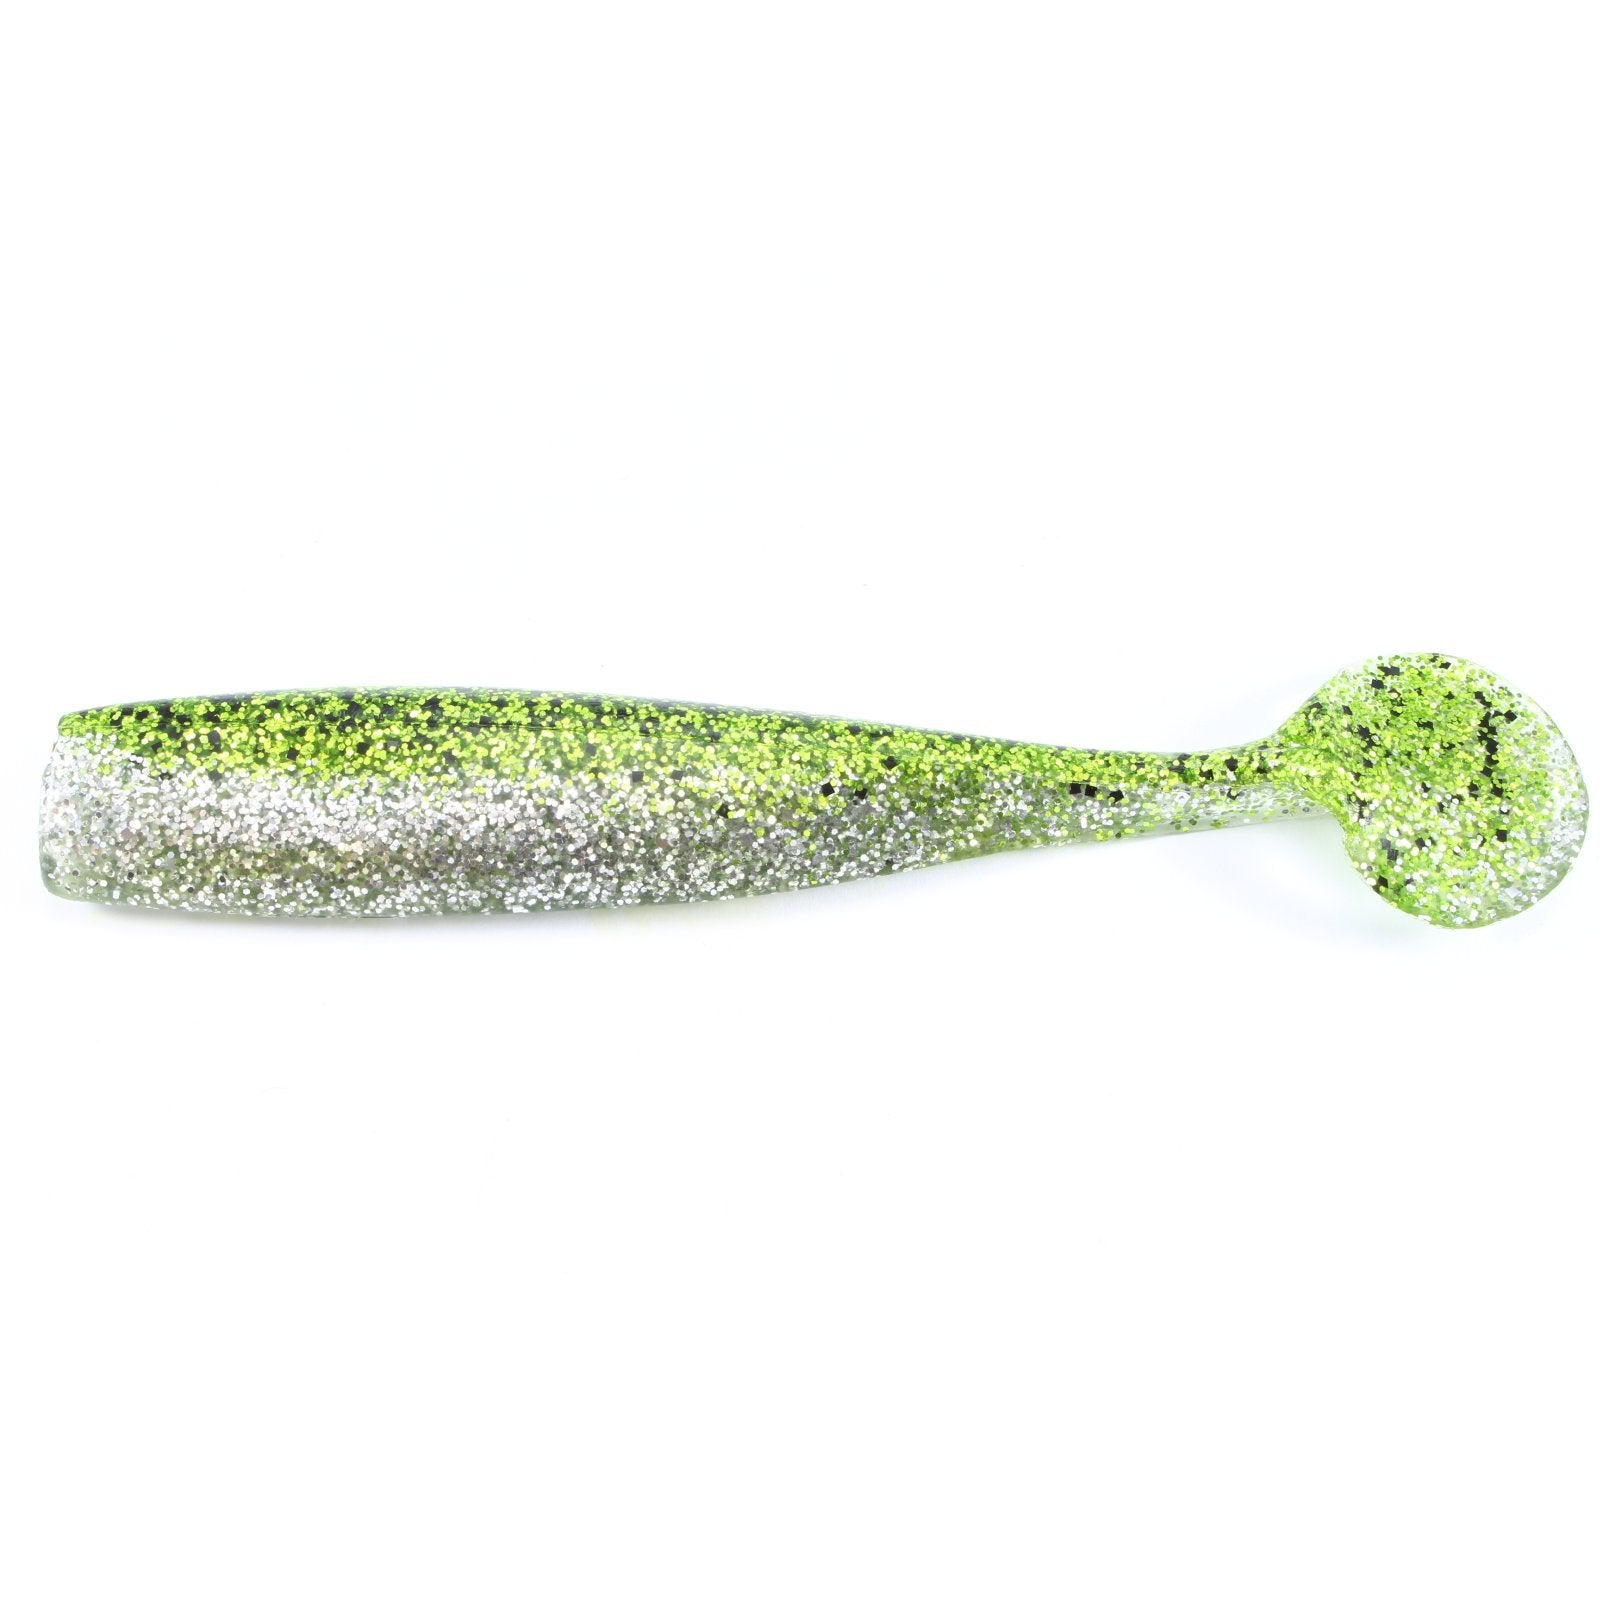 Lunker City Shaker Gummifisch Chartreuse Ice